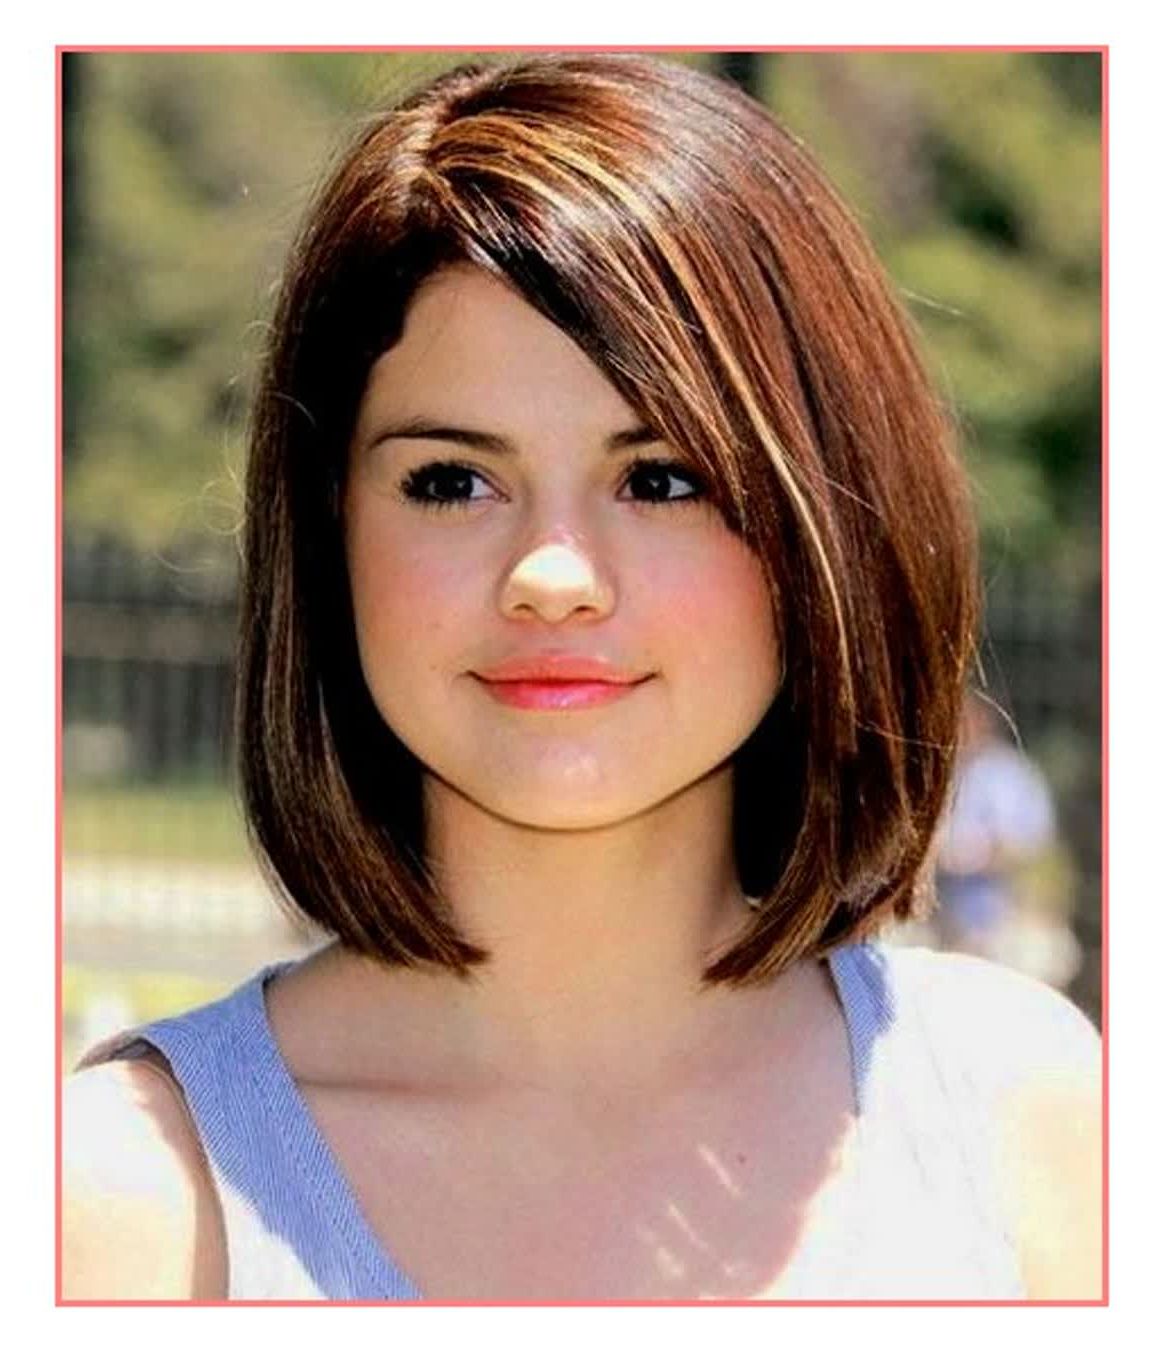 Hair Cuts : Short Haircuts For Ladies With Thick Hair Women Over Throughout Women Short To Medium Hairstyles (View 11 of 25)